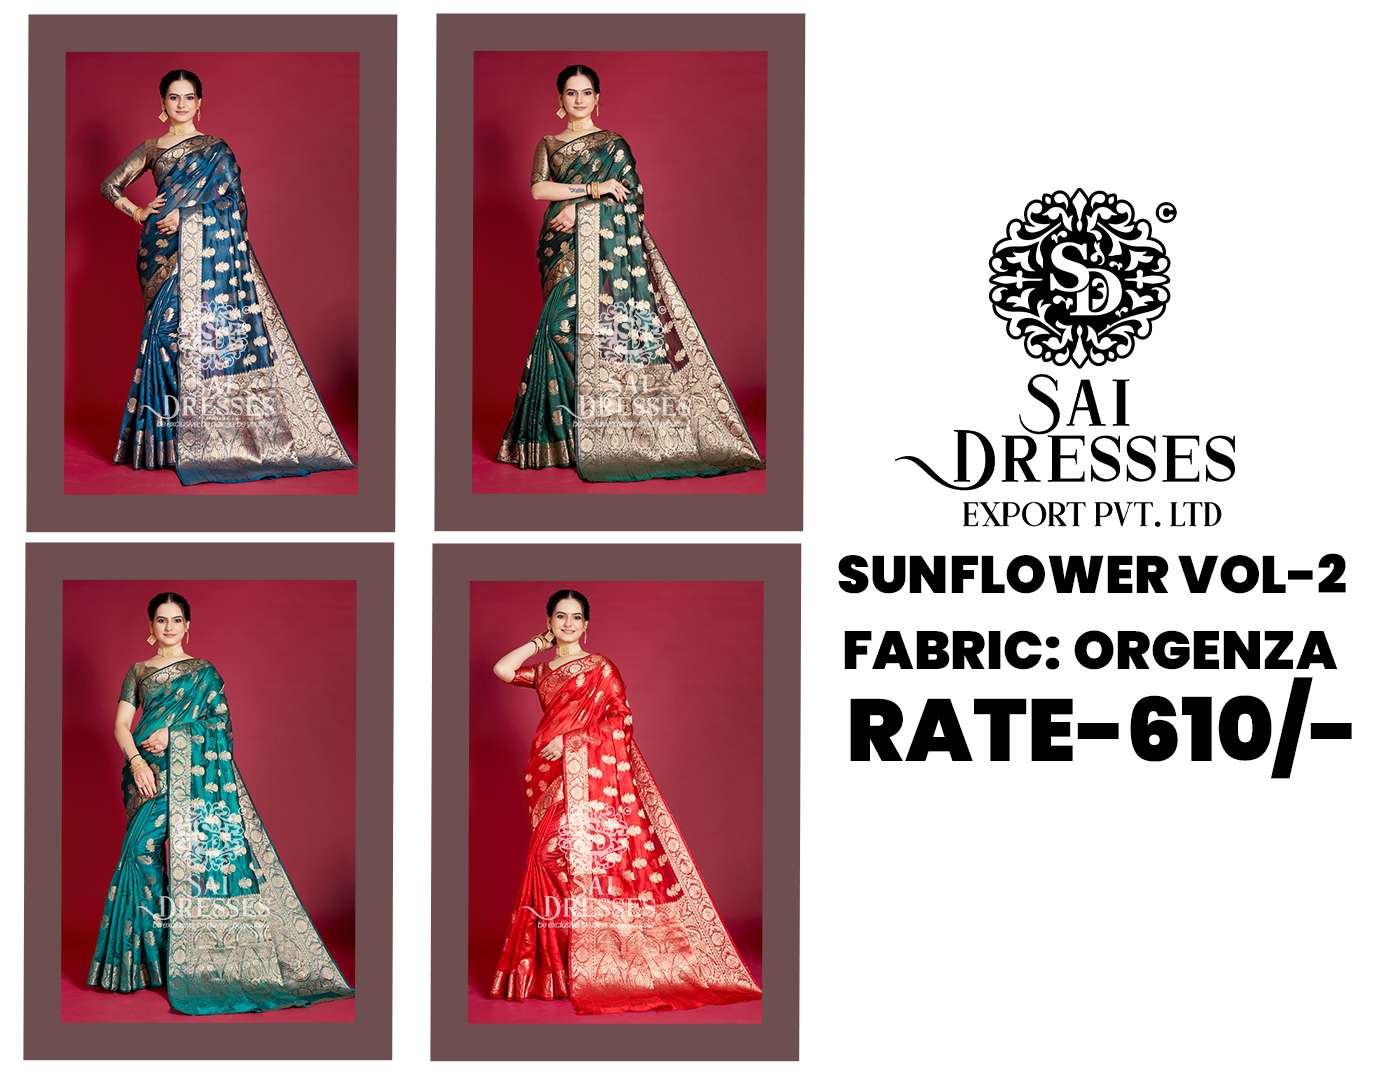 SAI DRESSES PRESENT SUNFLOWER VOL 2 READY TO FANCY WEAR ORGENZA WITH JACQUARD WEAVING SAREE IN WHOLESALE RATE IN SURAT